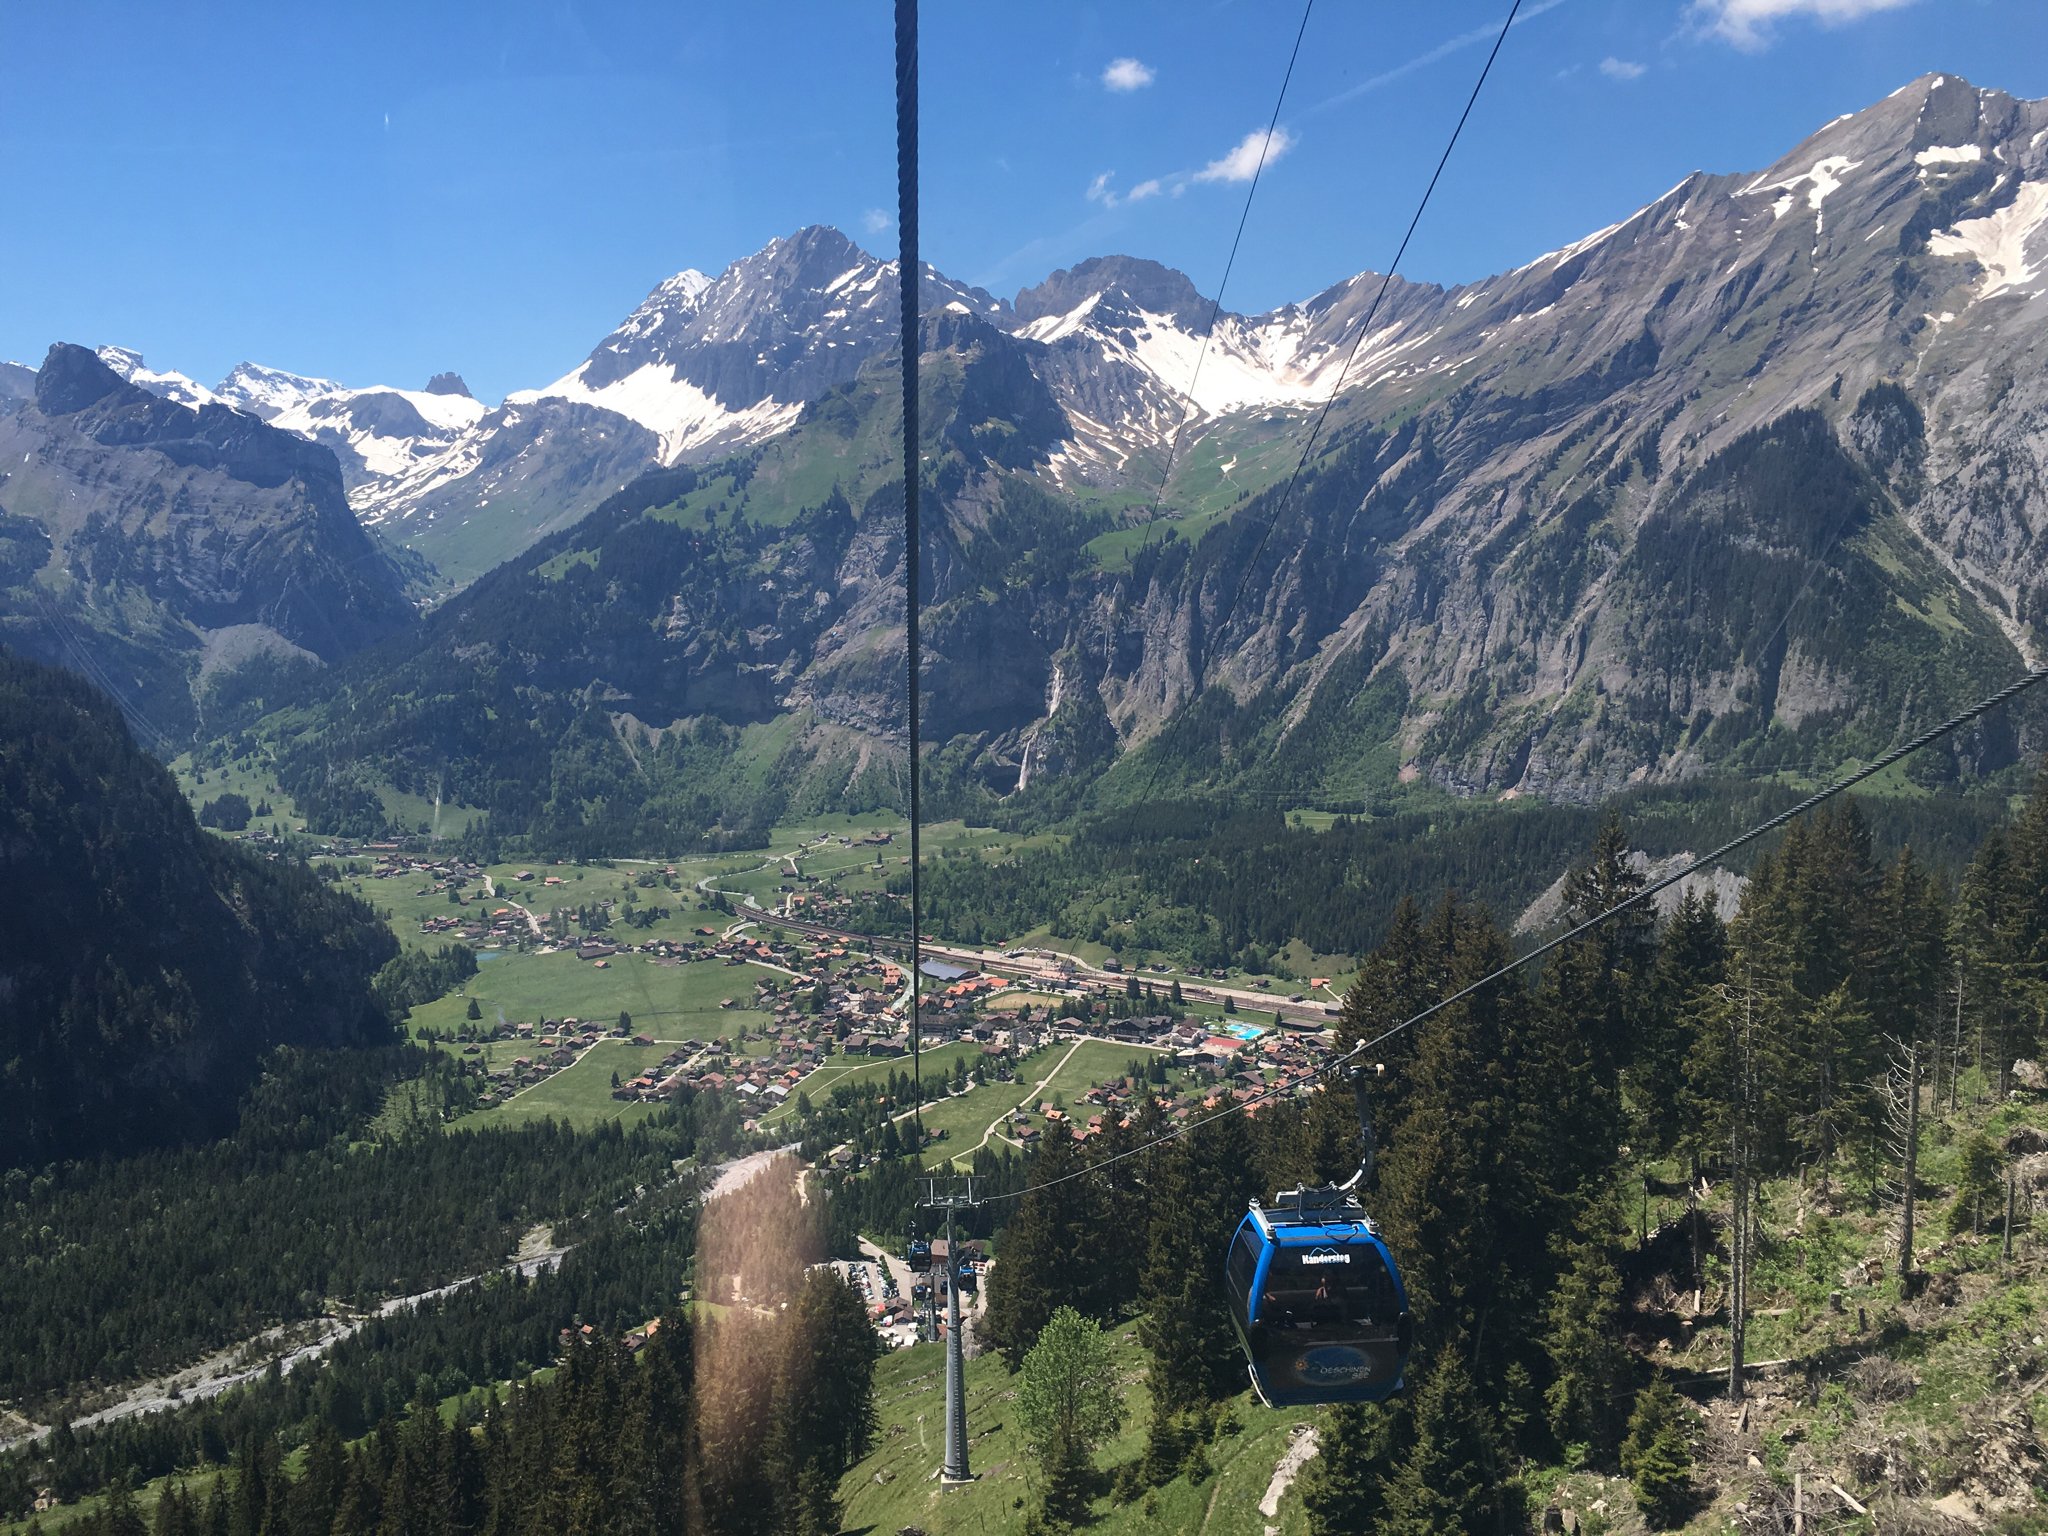 View from the gondola descending from Oeschinensee to Kanderstag